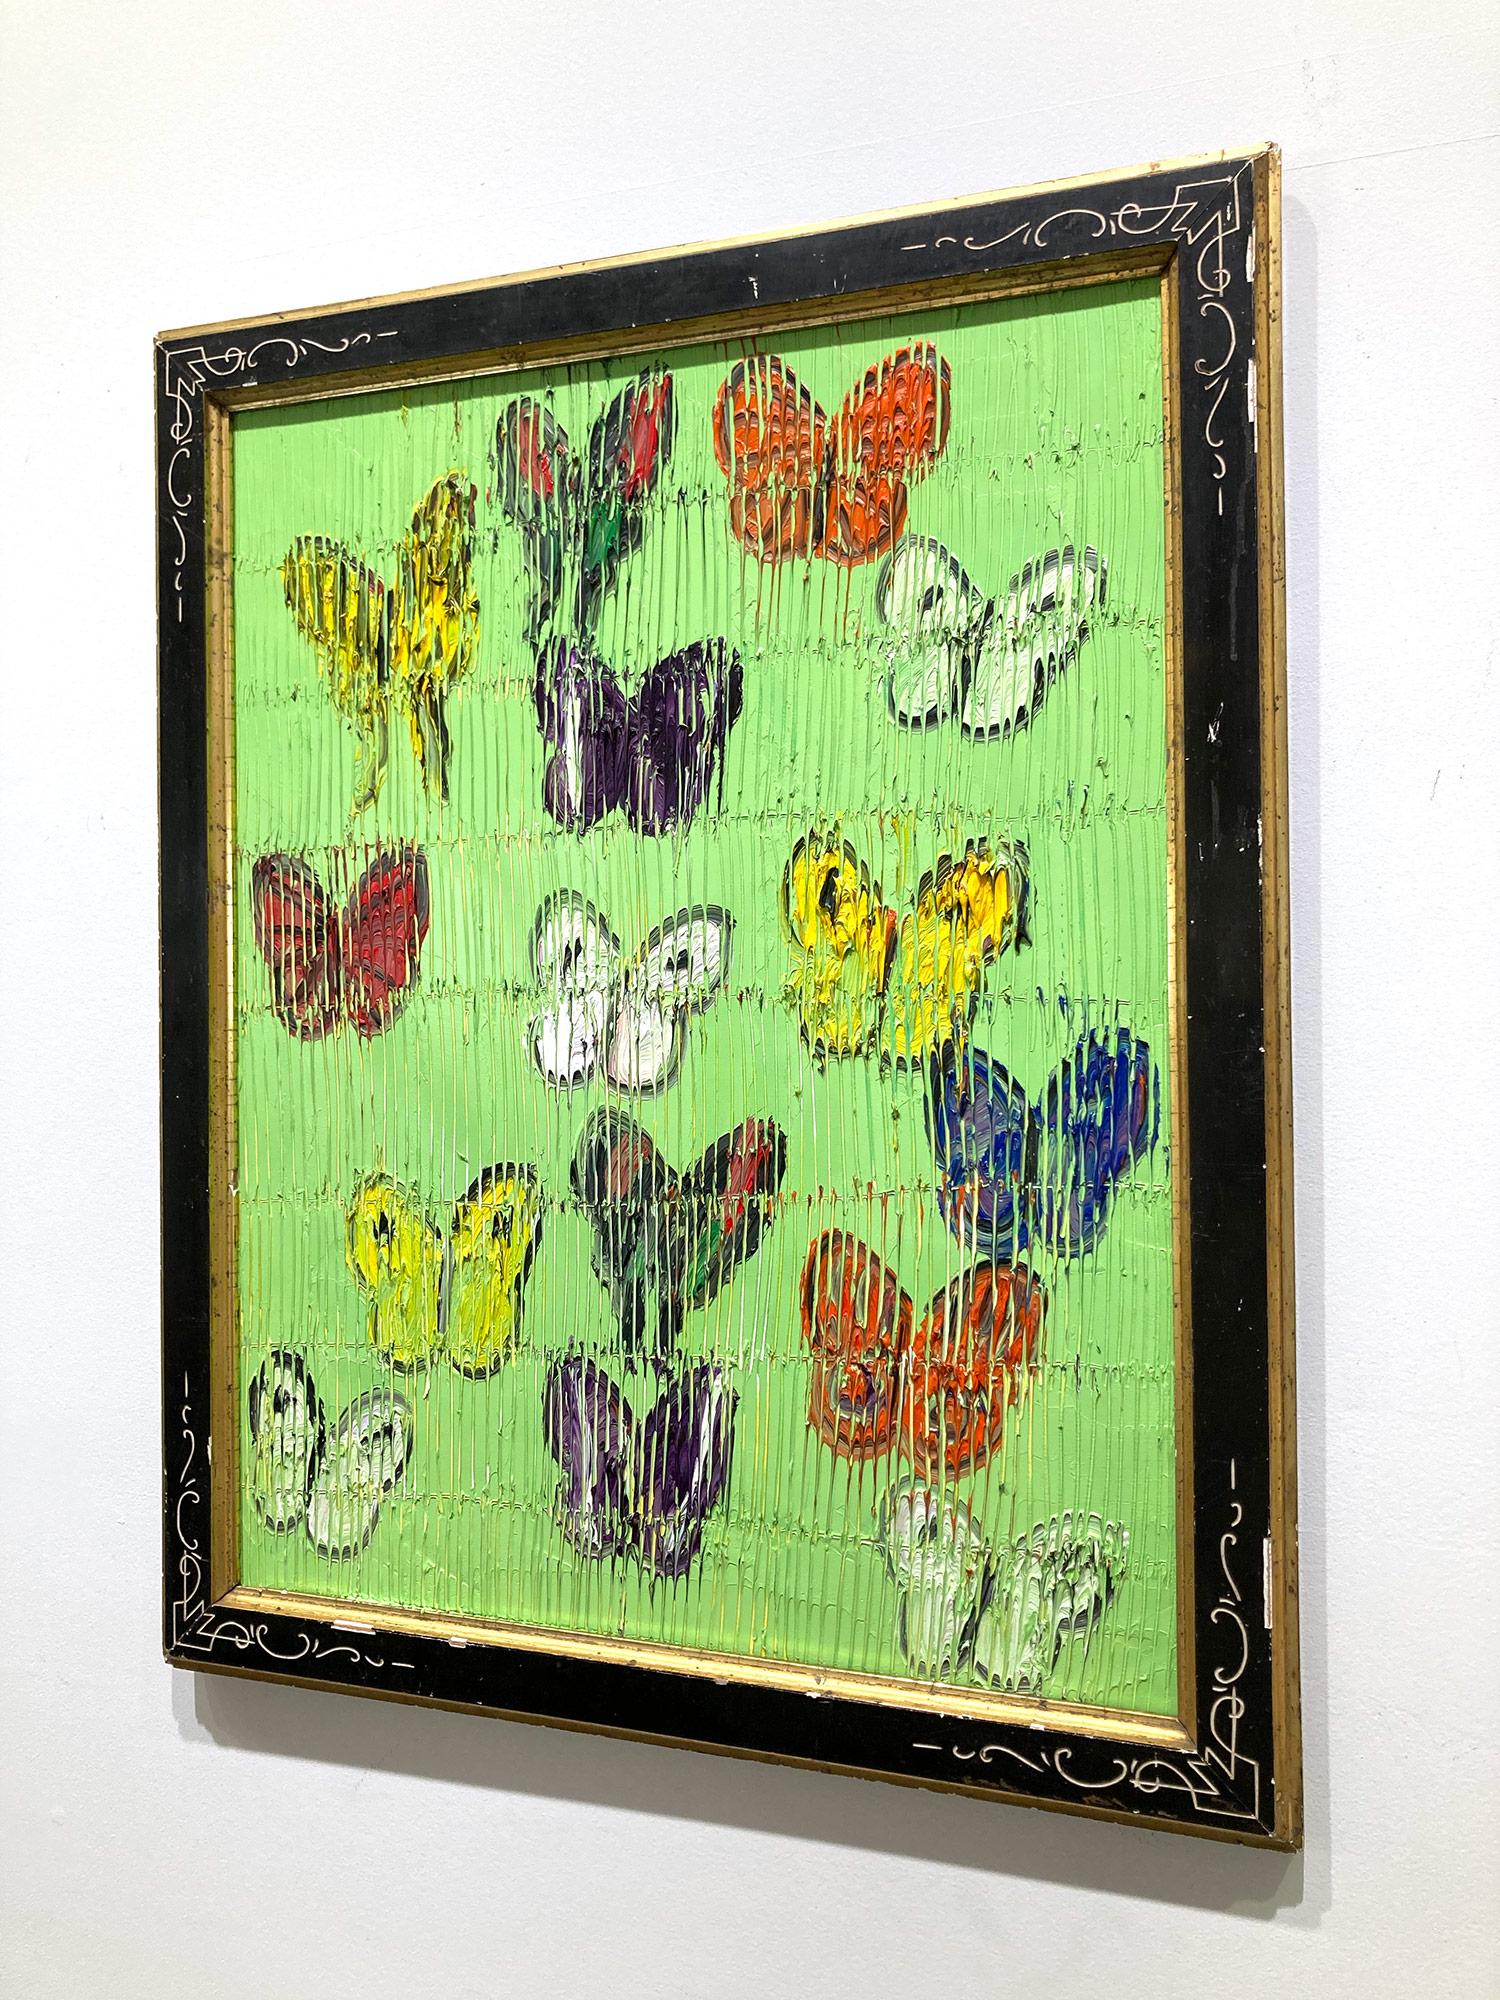 A wonderful composition of one of Slonem's most iconic subjects, Butterflies. This piece depicts multicolor delicate butterflies in ascension placed in a wonderful Paris Green landscape. Slonem traces his famous crosshatch details throughout the